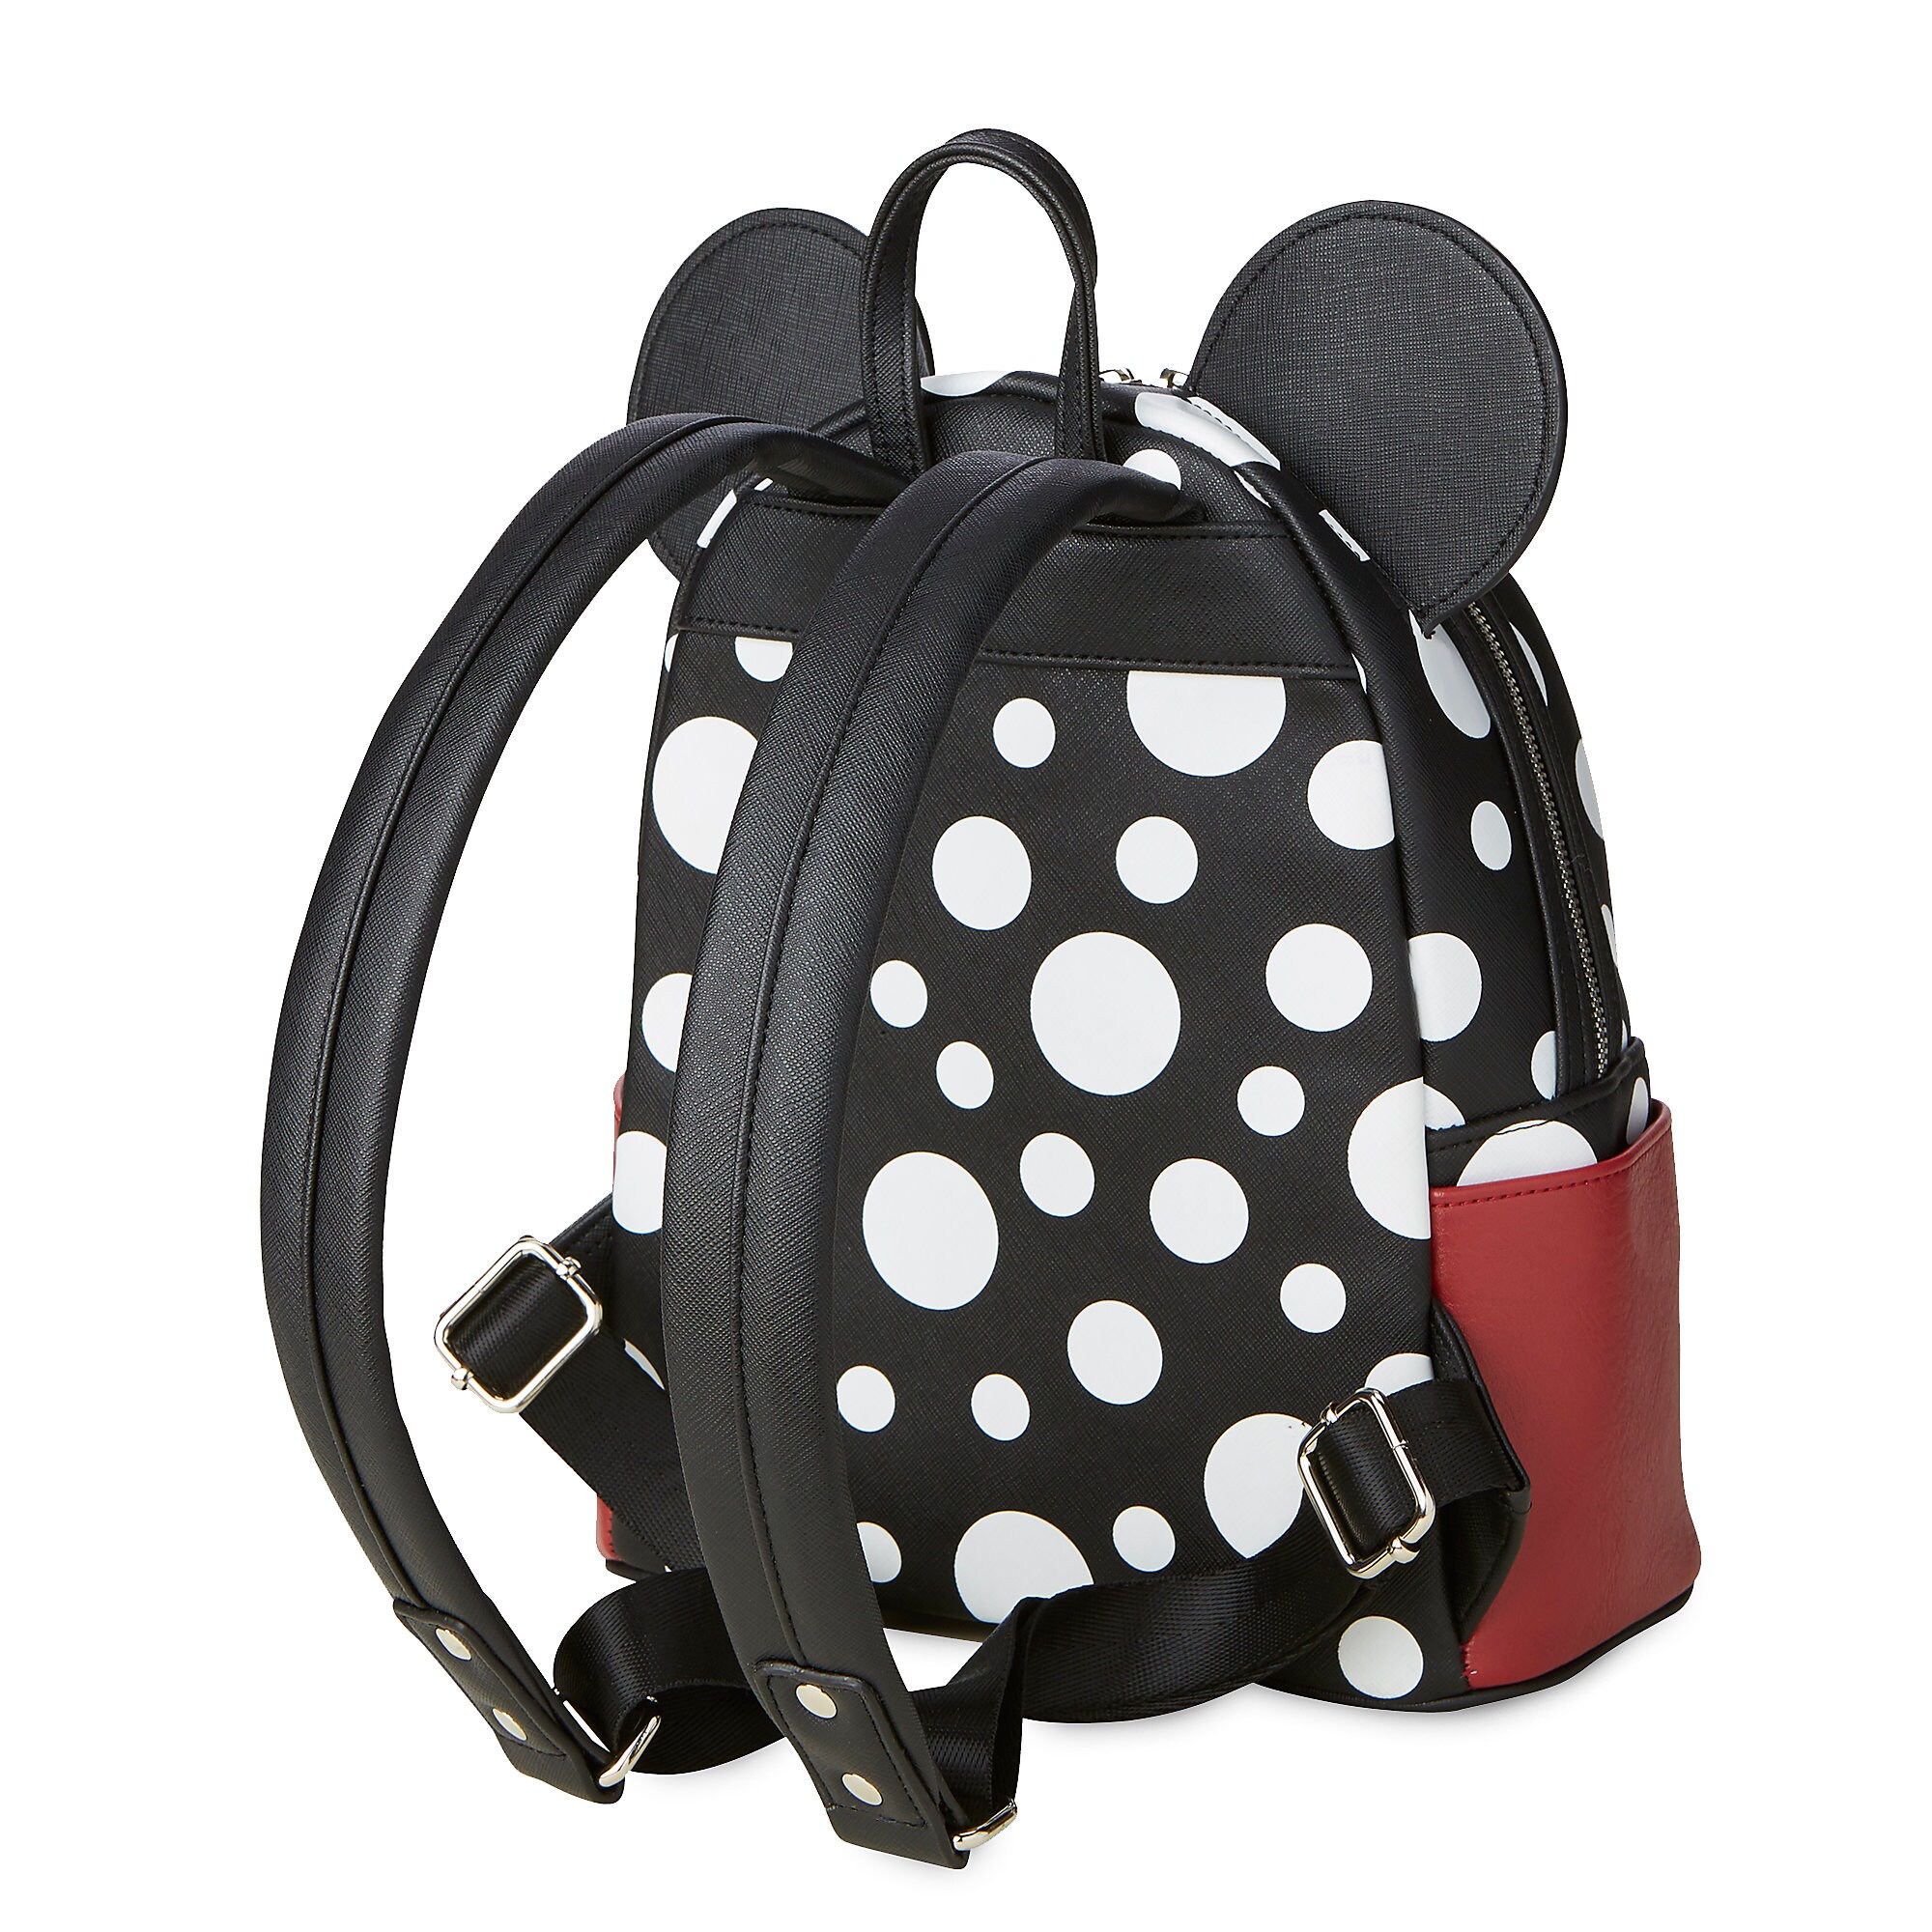 Minnie Mouse Mini Backpack by Loungefly